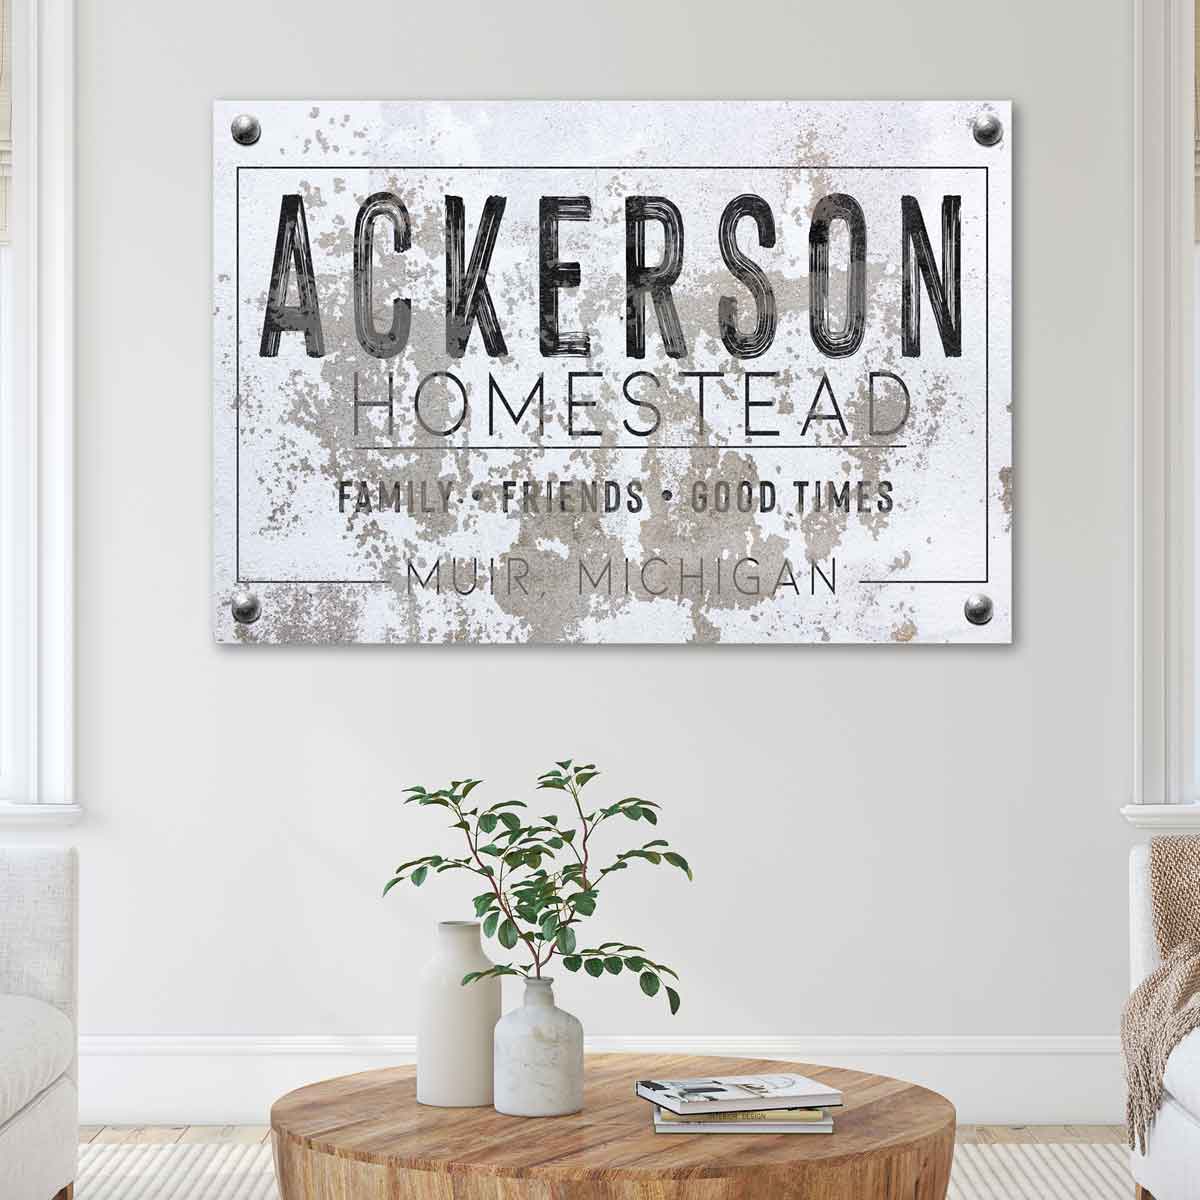 modern farmhouse wall decor sign on faux stone background: (family name) Homestead, family, friends, good times.